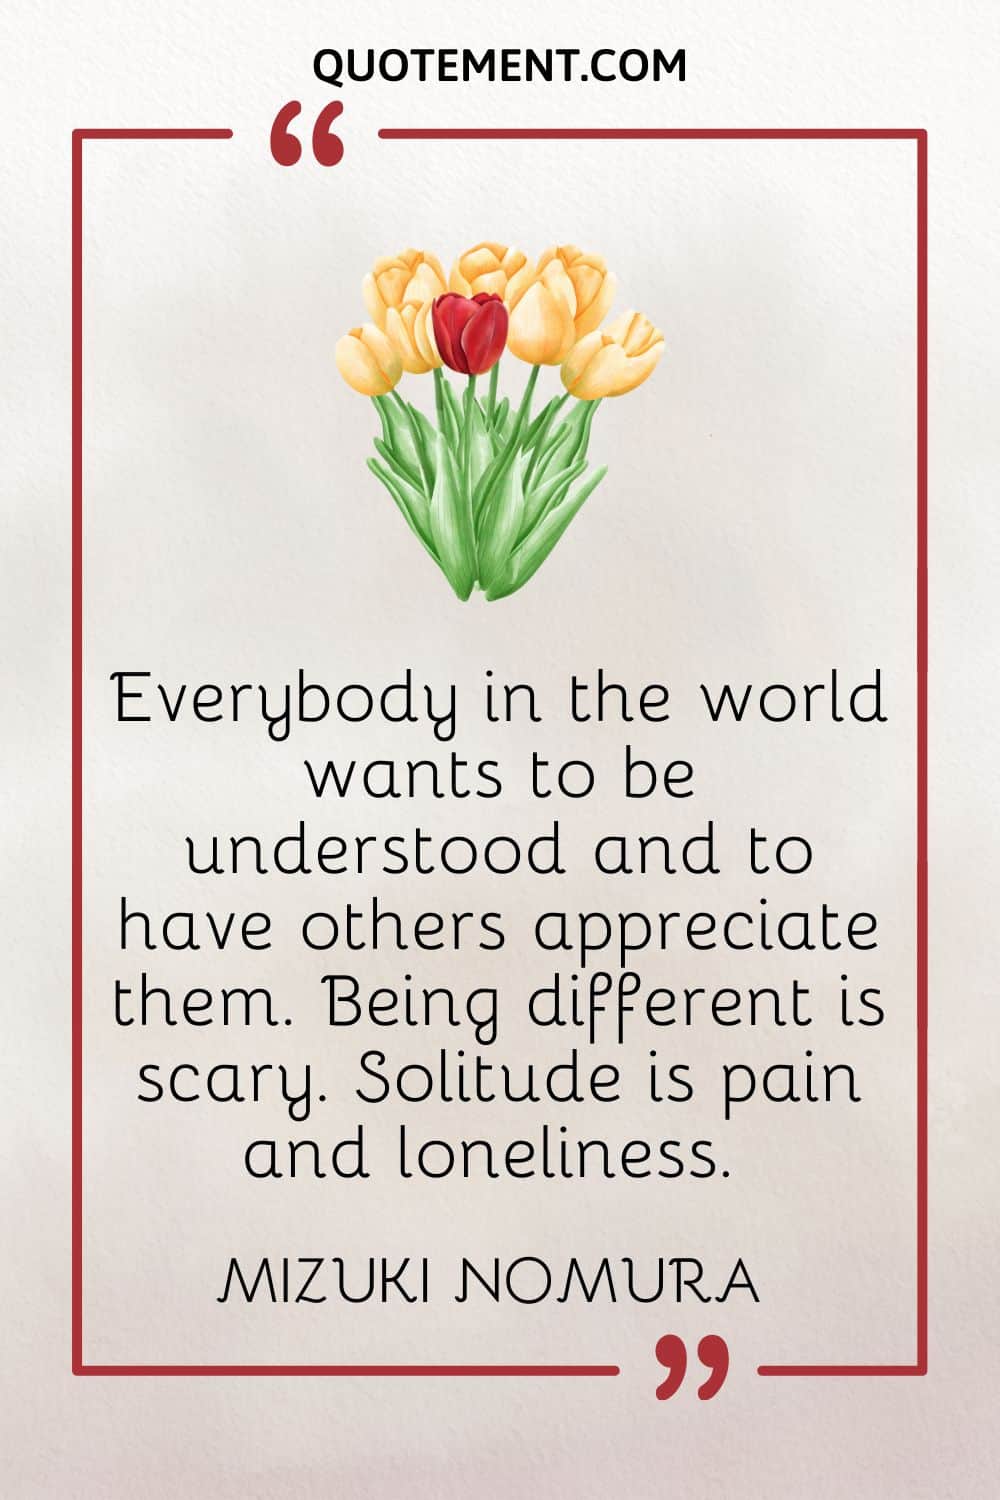 Everybody in the world wants to be understood and to have others appreciate them. Being different is scary